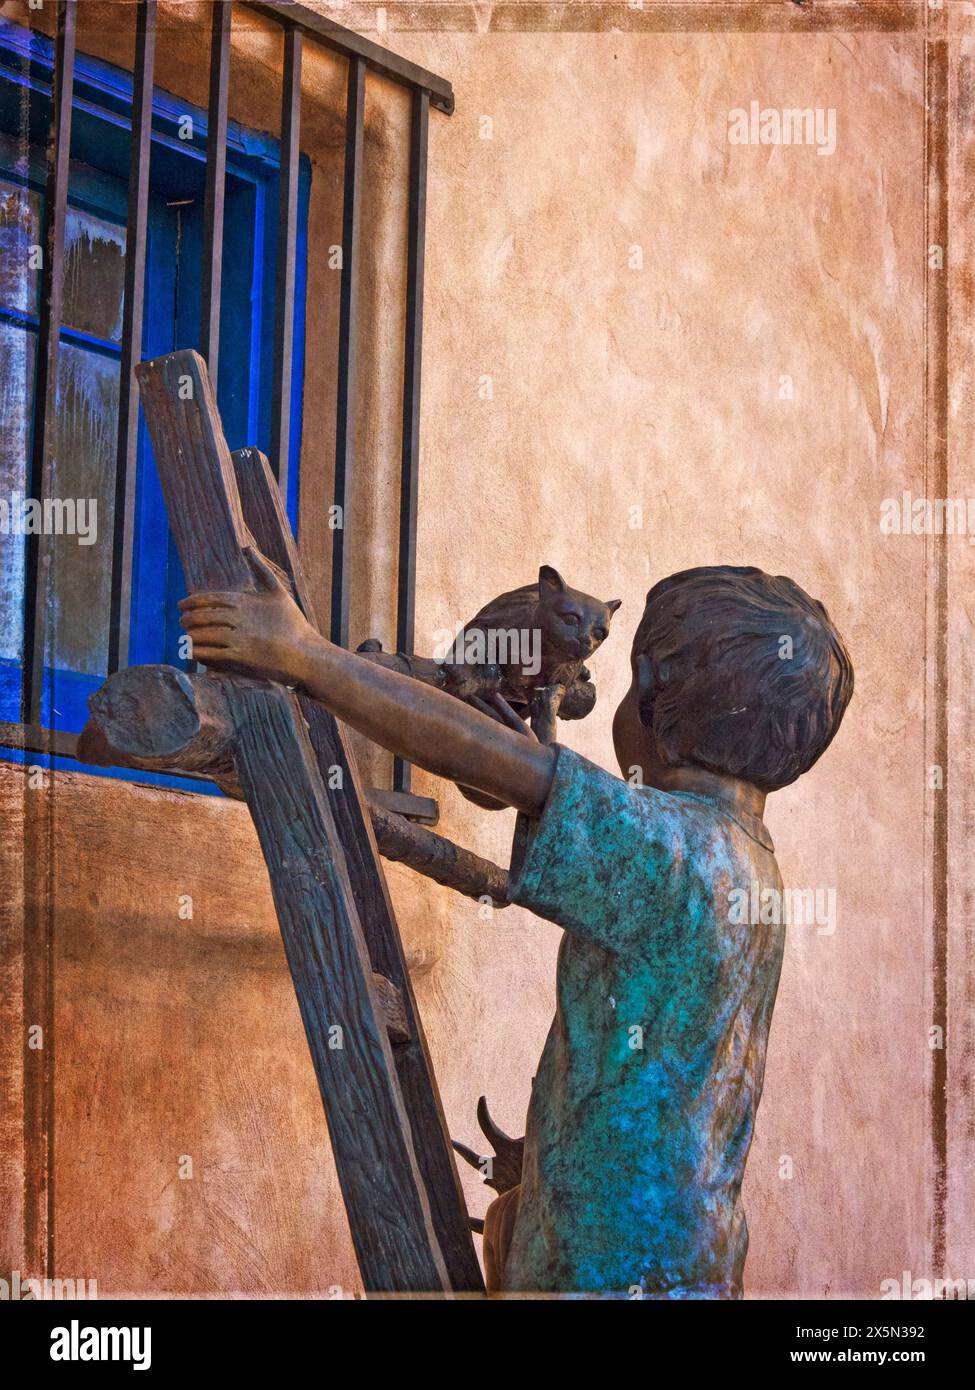 USA, New Mexico, Sante Fe. Colorful bronze statue of a boy on a ladder rescuing a cat from a window sill. (Editorial Use Only) Stock Photo